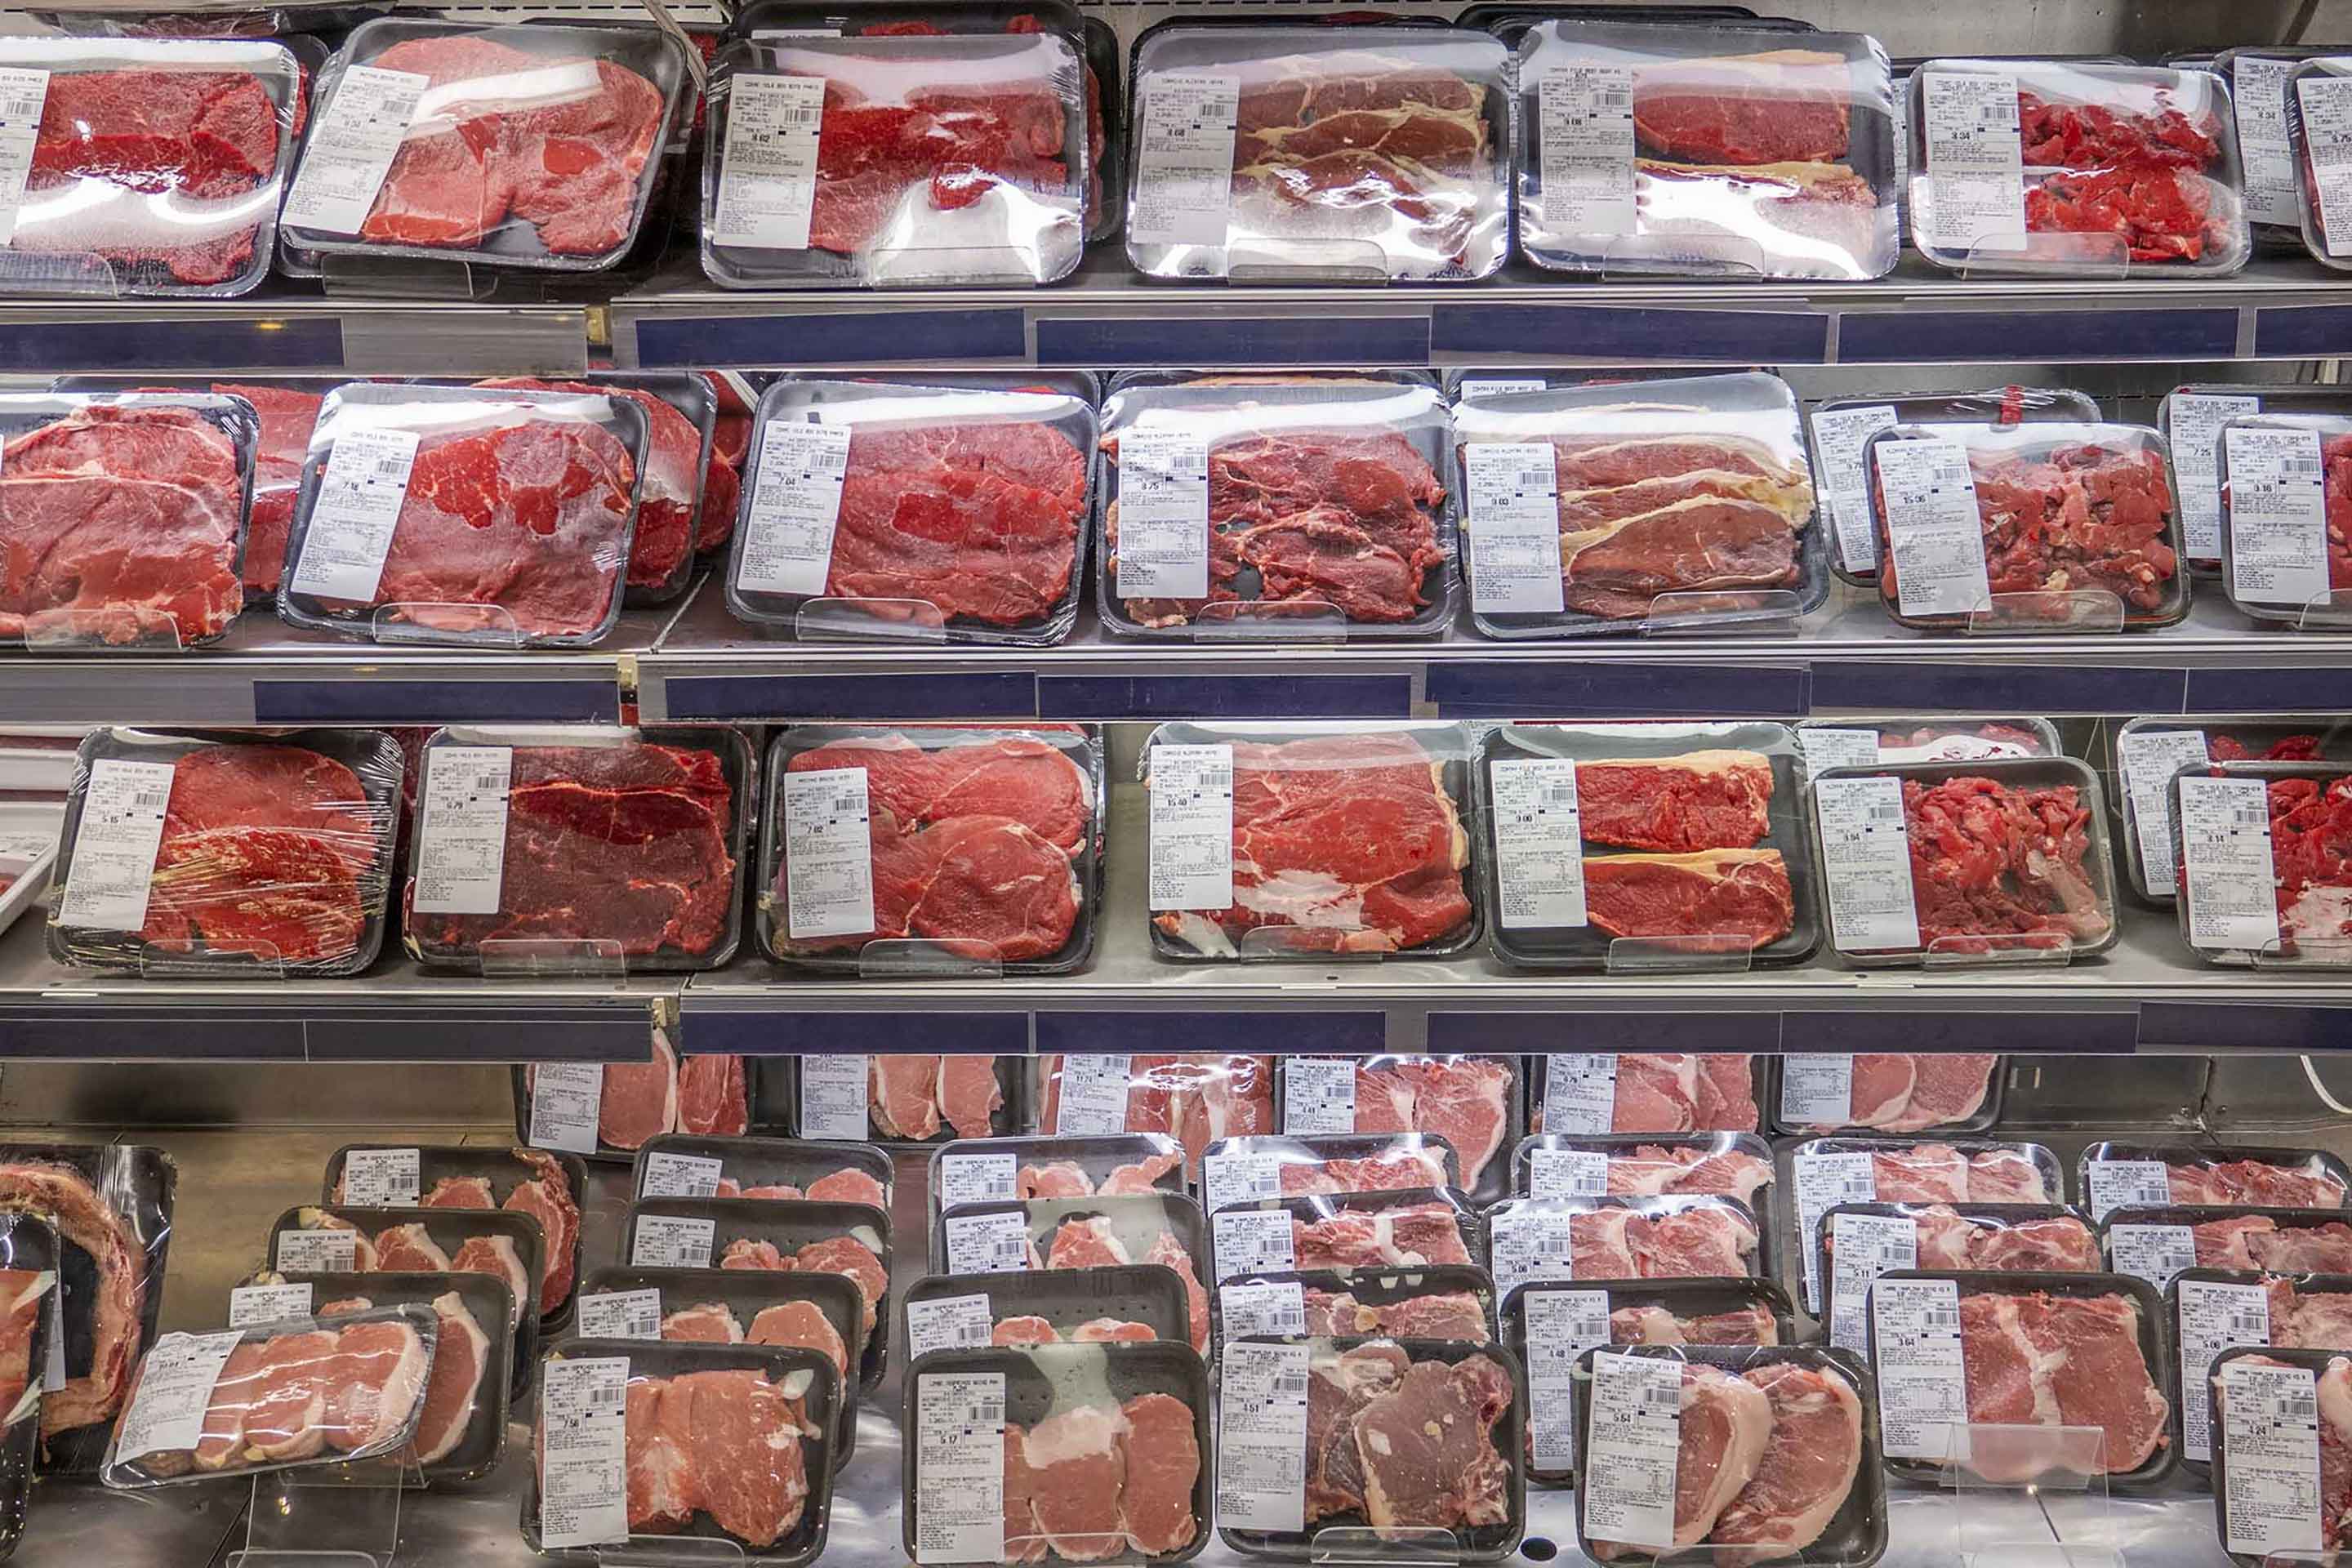 Prices Are Finally Falling for Meat, Flights, Computers and More